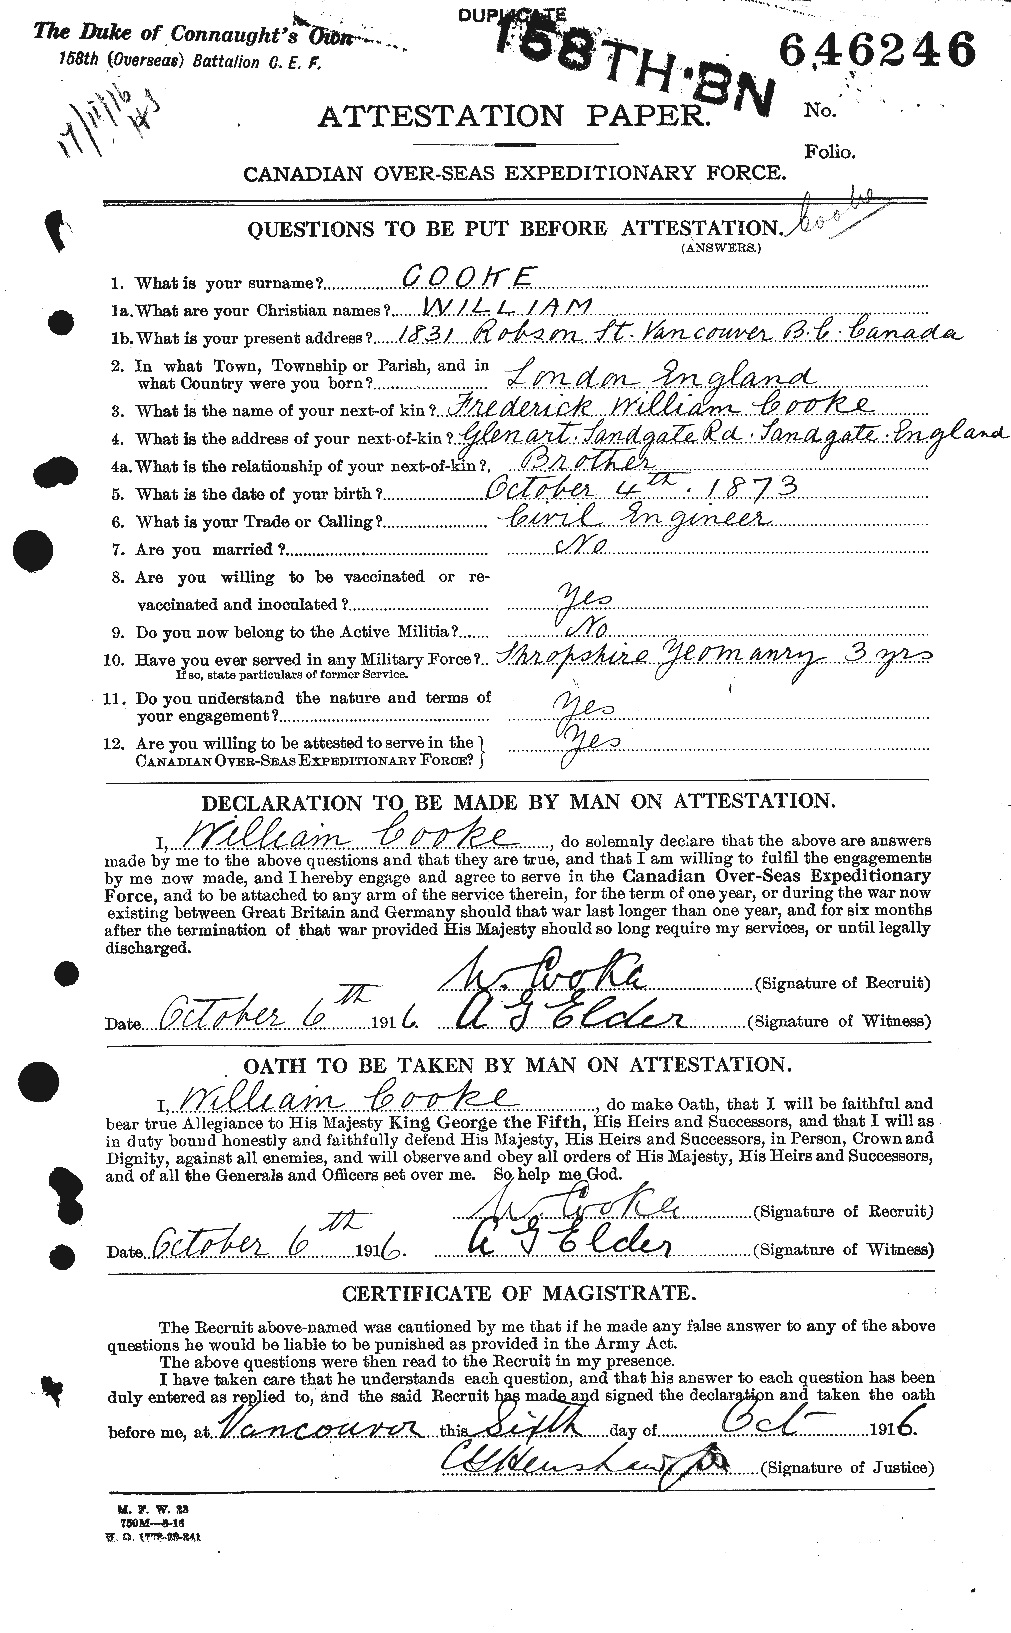 Personnel Records of the First World War - CEF 057037a